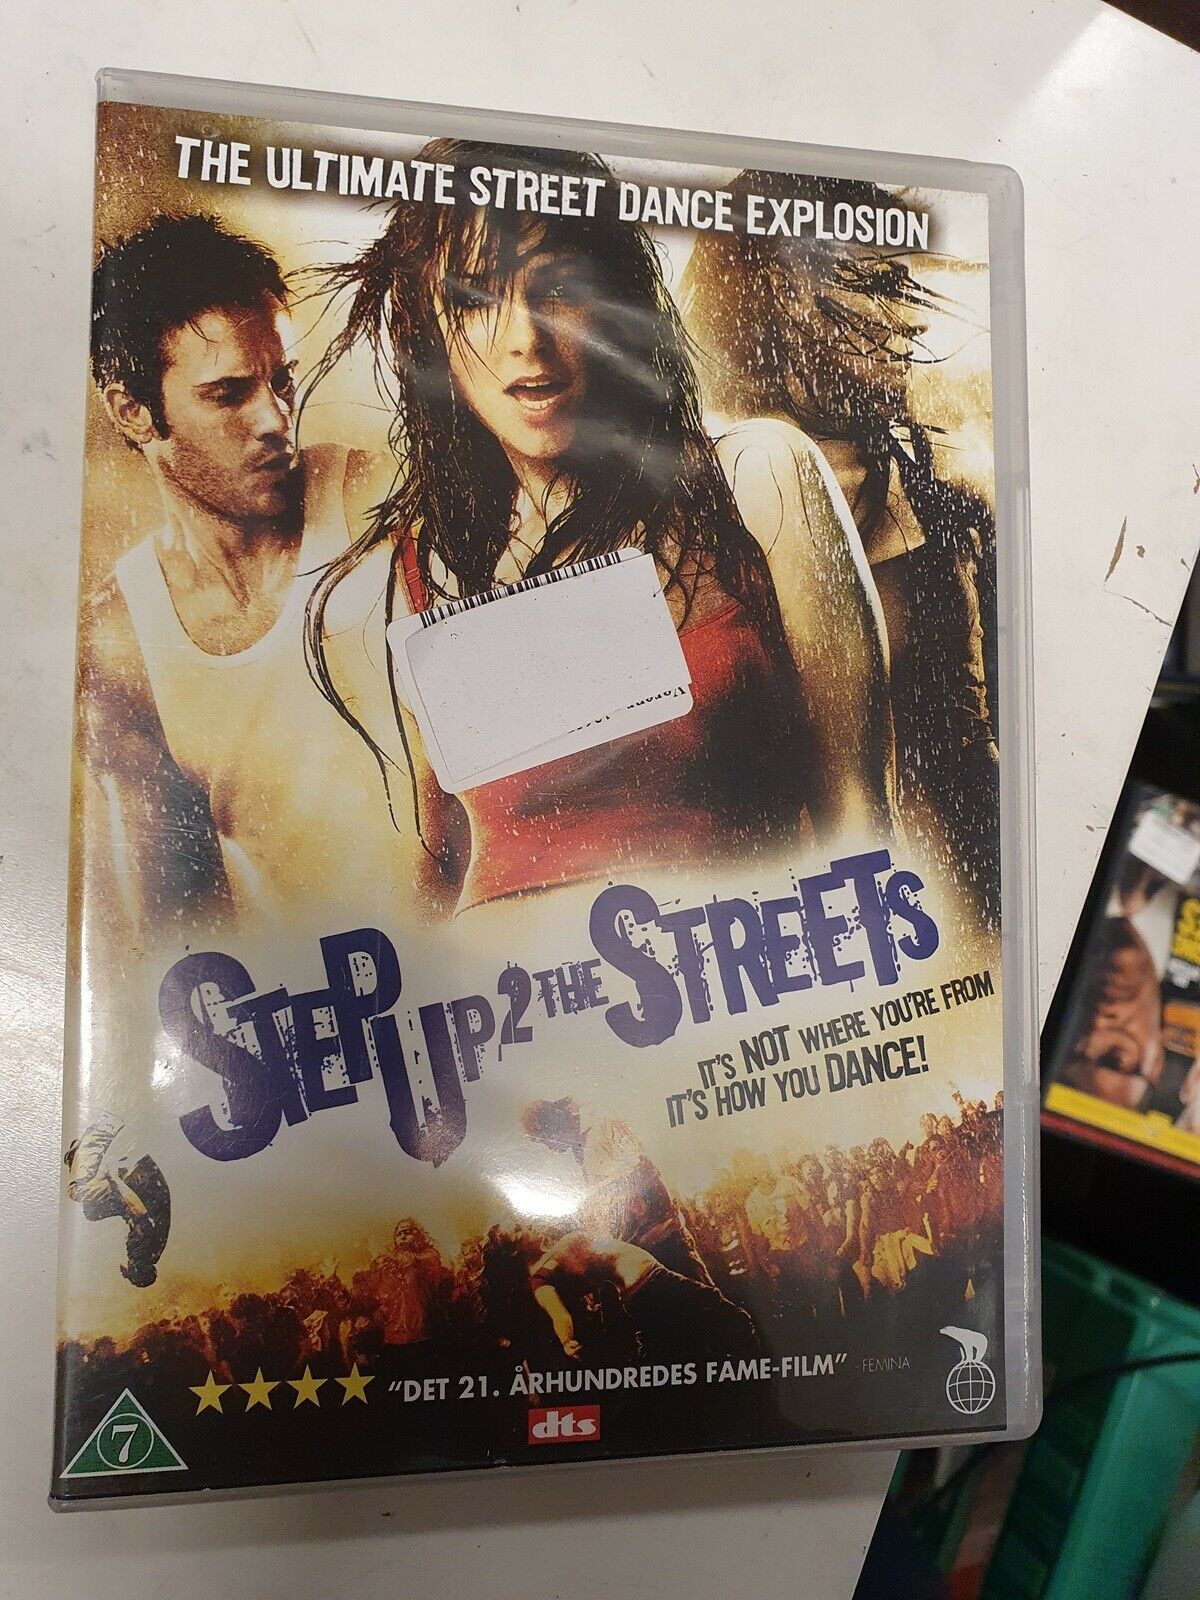 Step Up 2: The Streets (DVD)